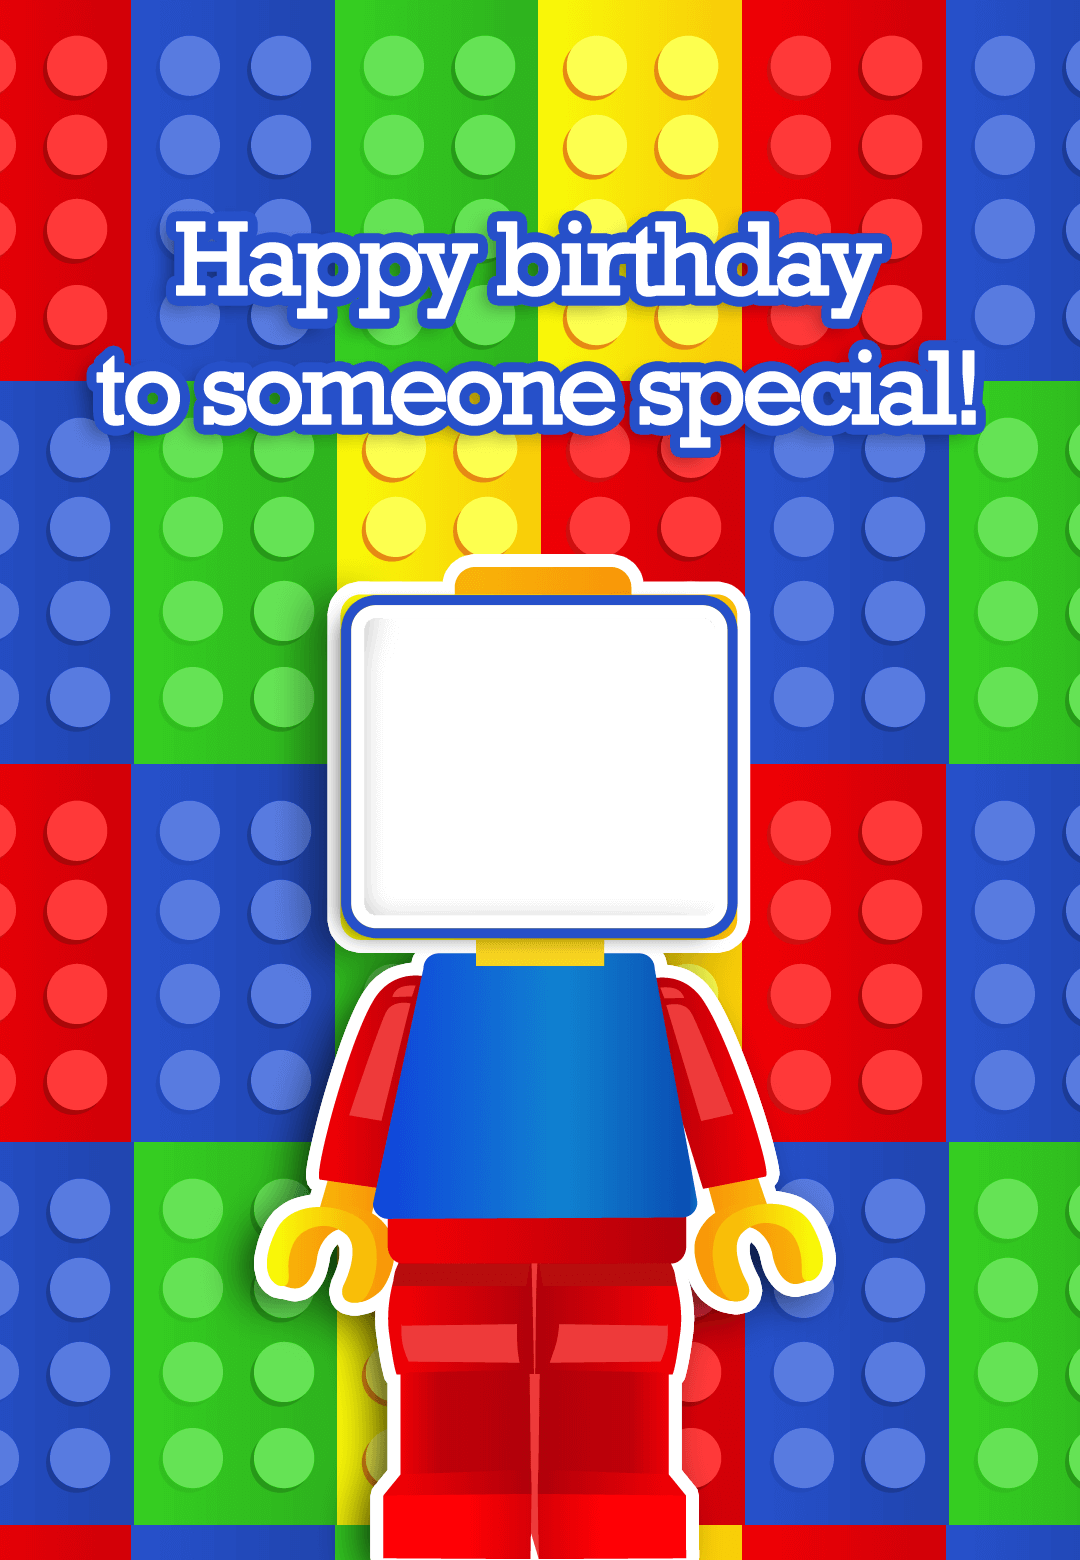 To Someone Special Birthday Card Free Greetings Island